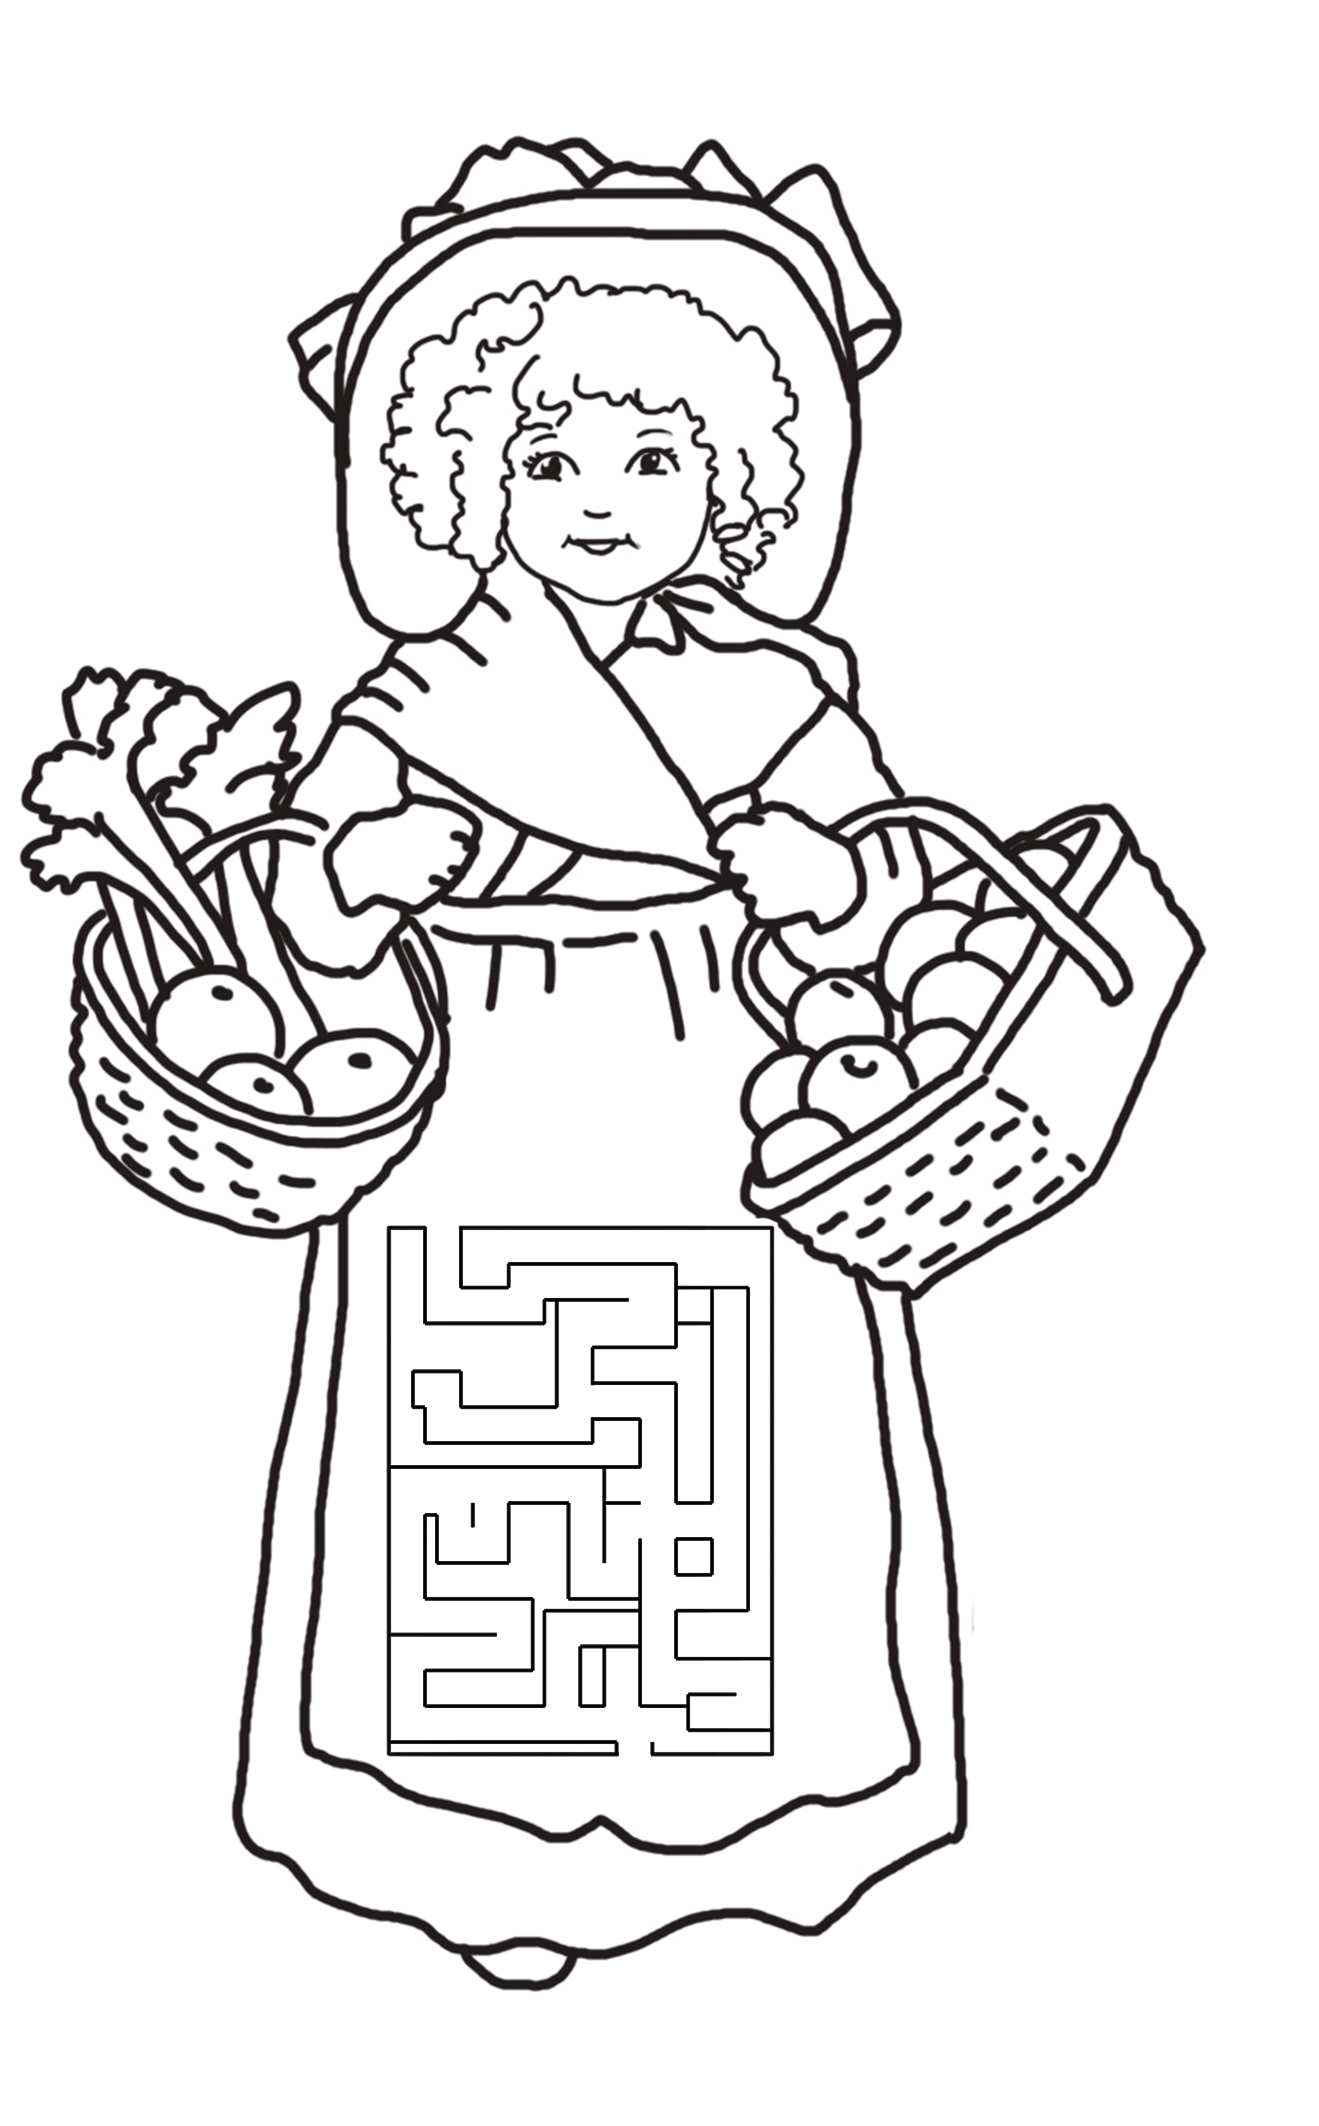 maze for thanksgiving girl with fruit